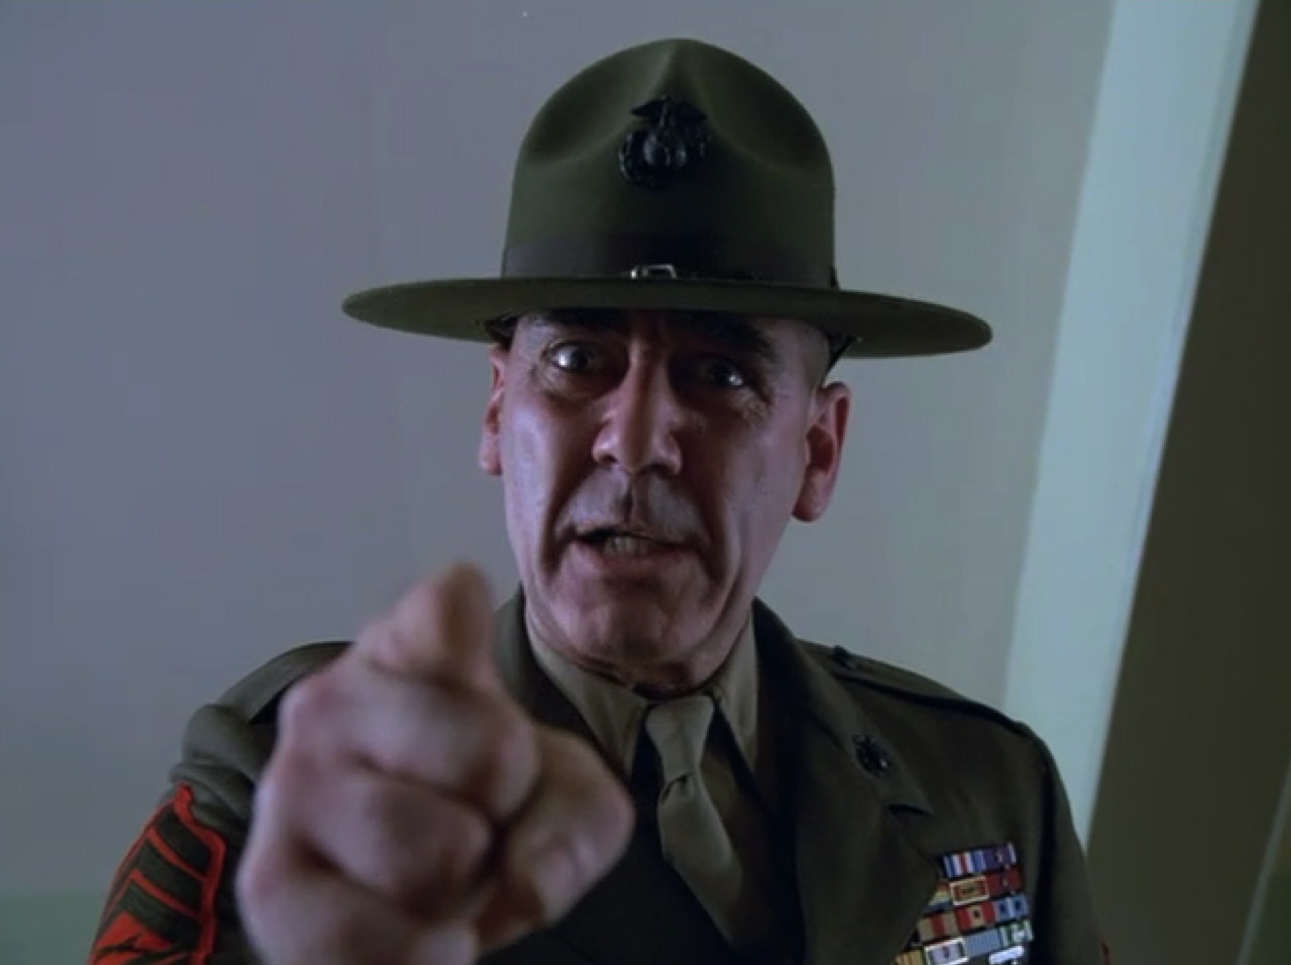 FULL METAL RACKET: THE PLAYLIST IS THE THING - full-metal-jacket